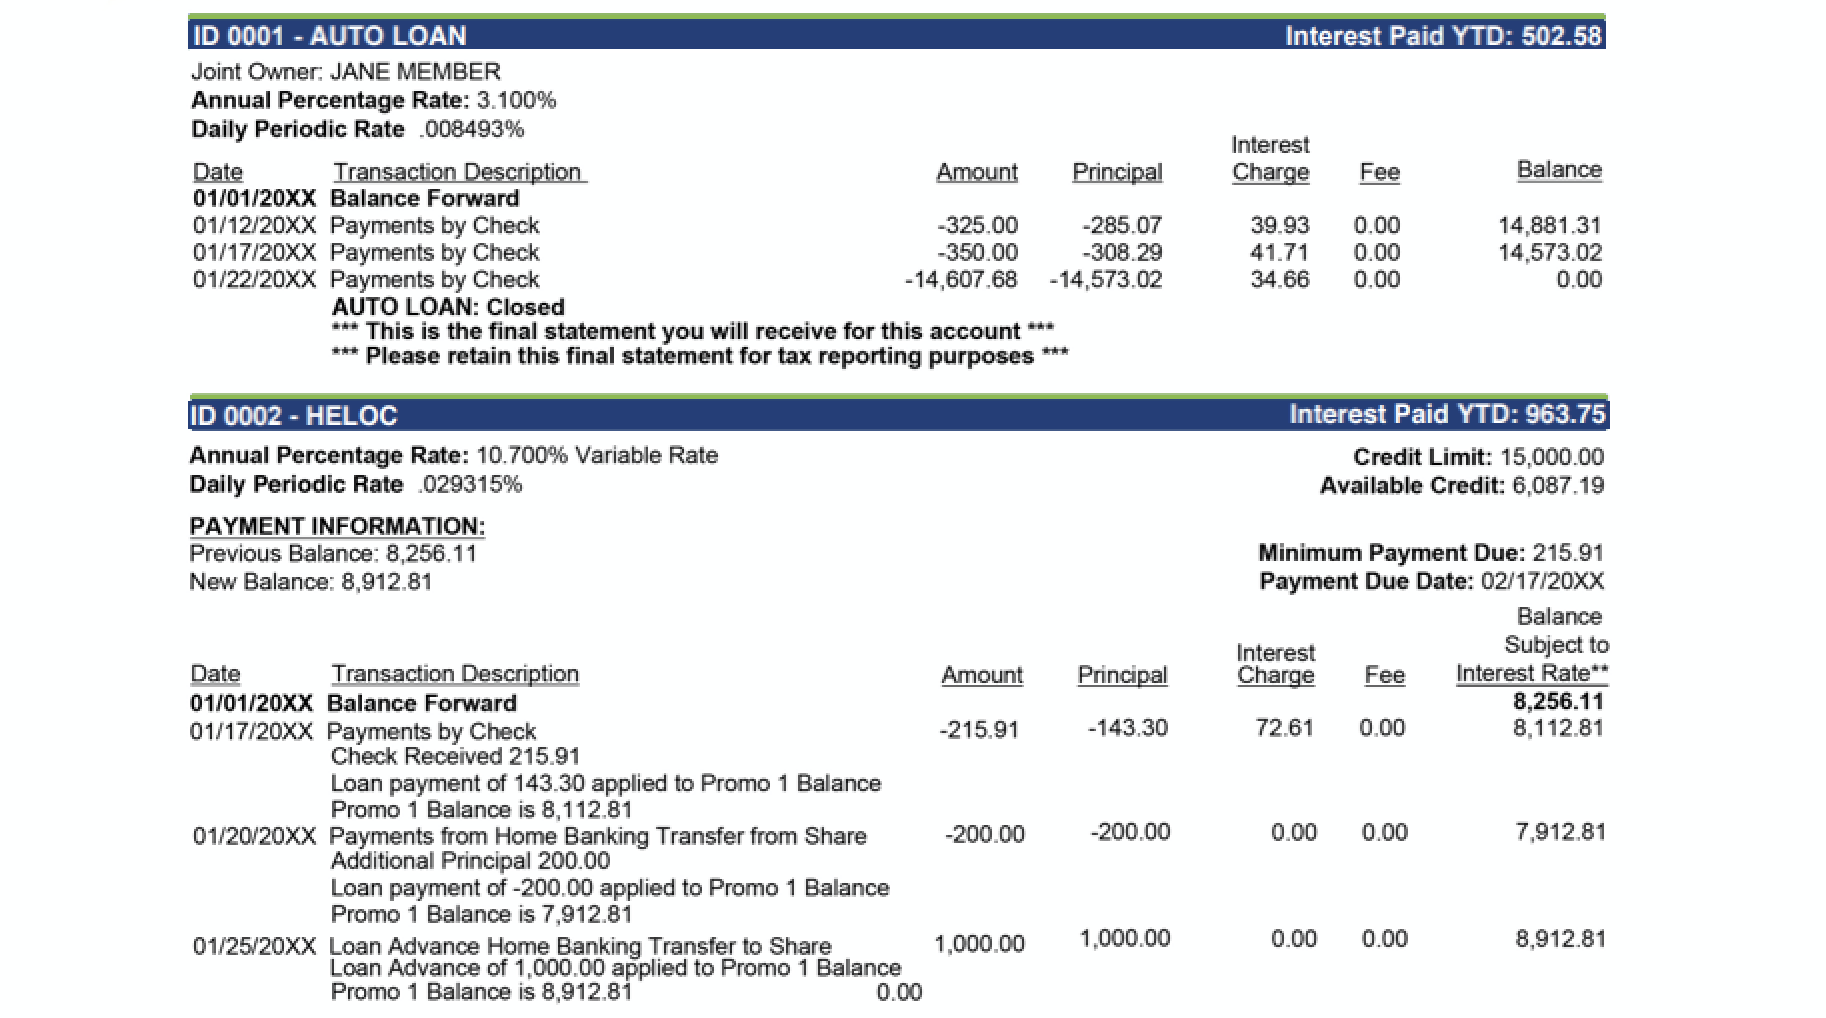 Section of sample account statement showing loan information and account activity.